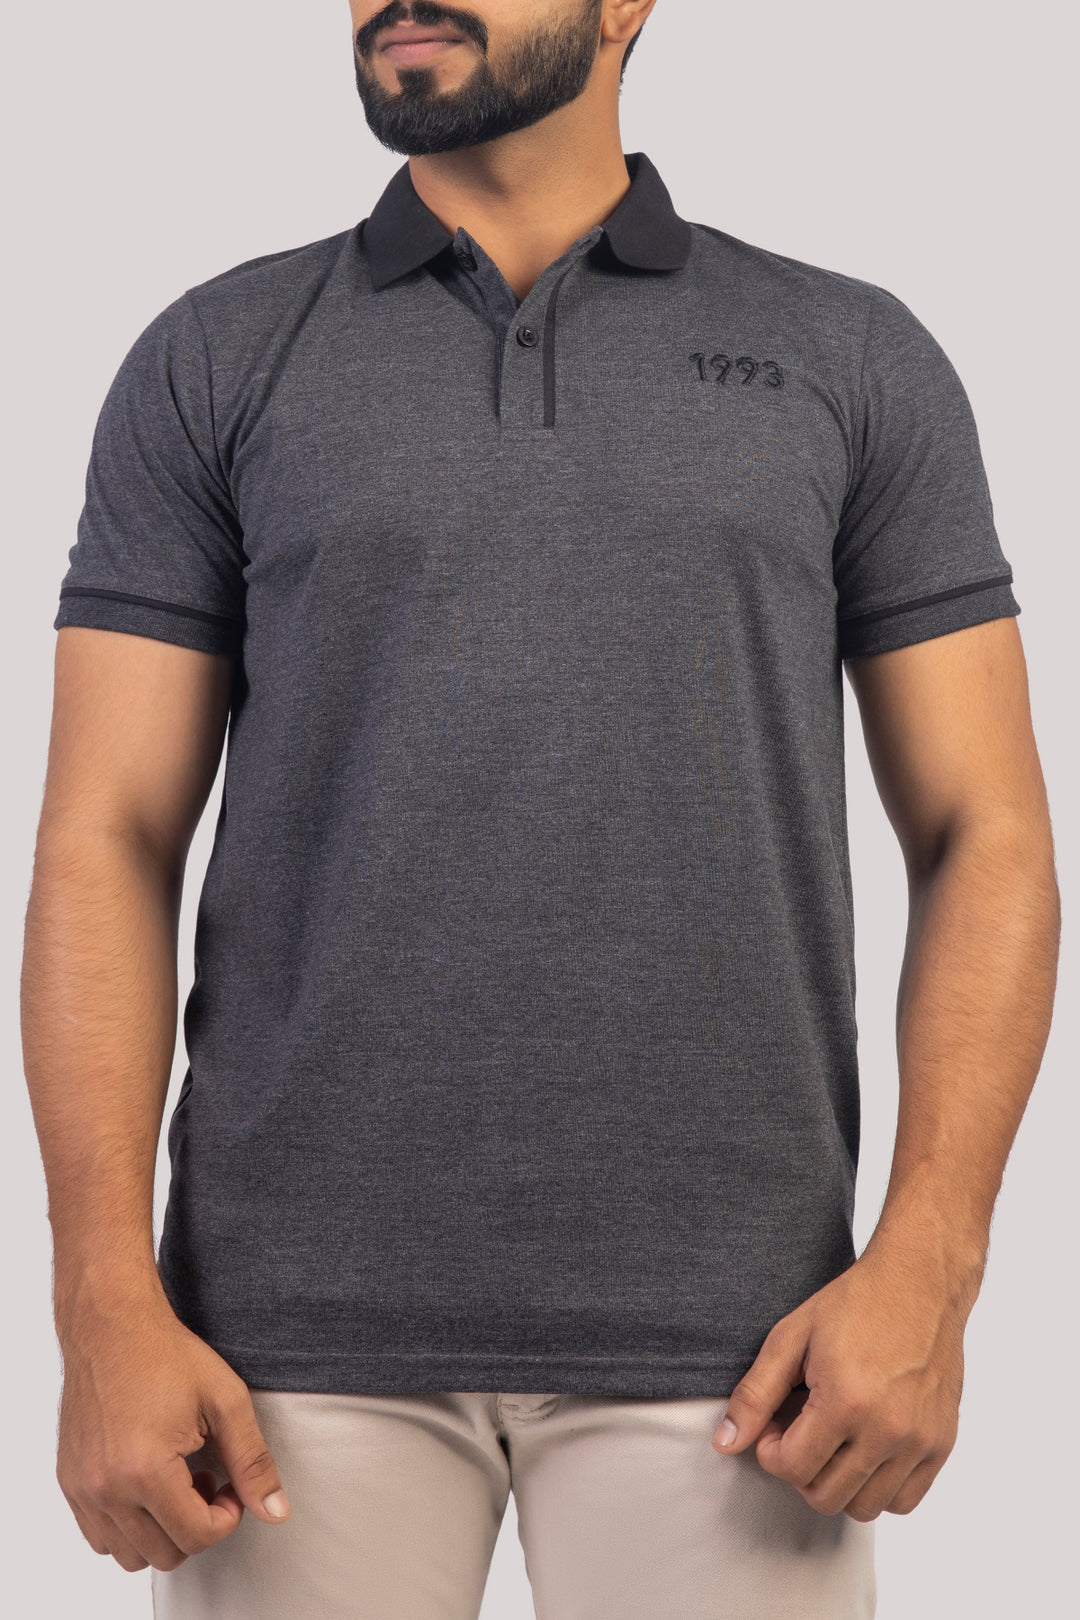 Charcoal Melange Contrast Embroidered Polo Shirt - A23 - MP0210R